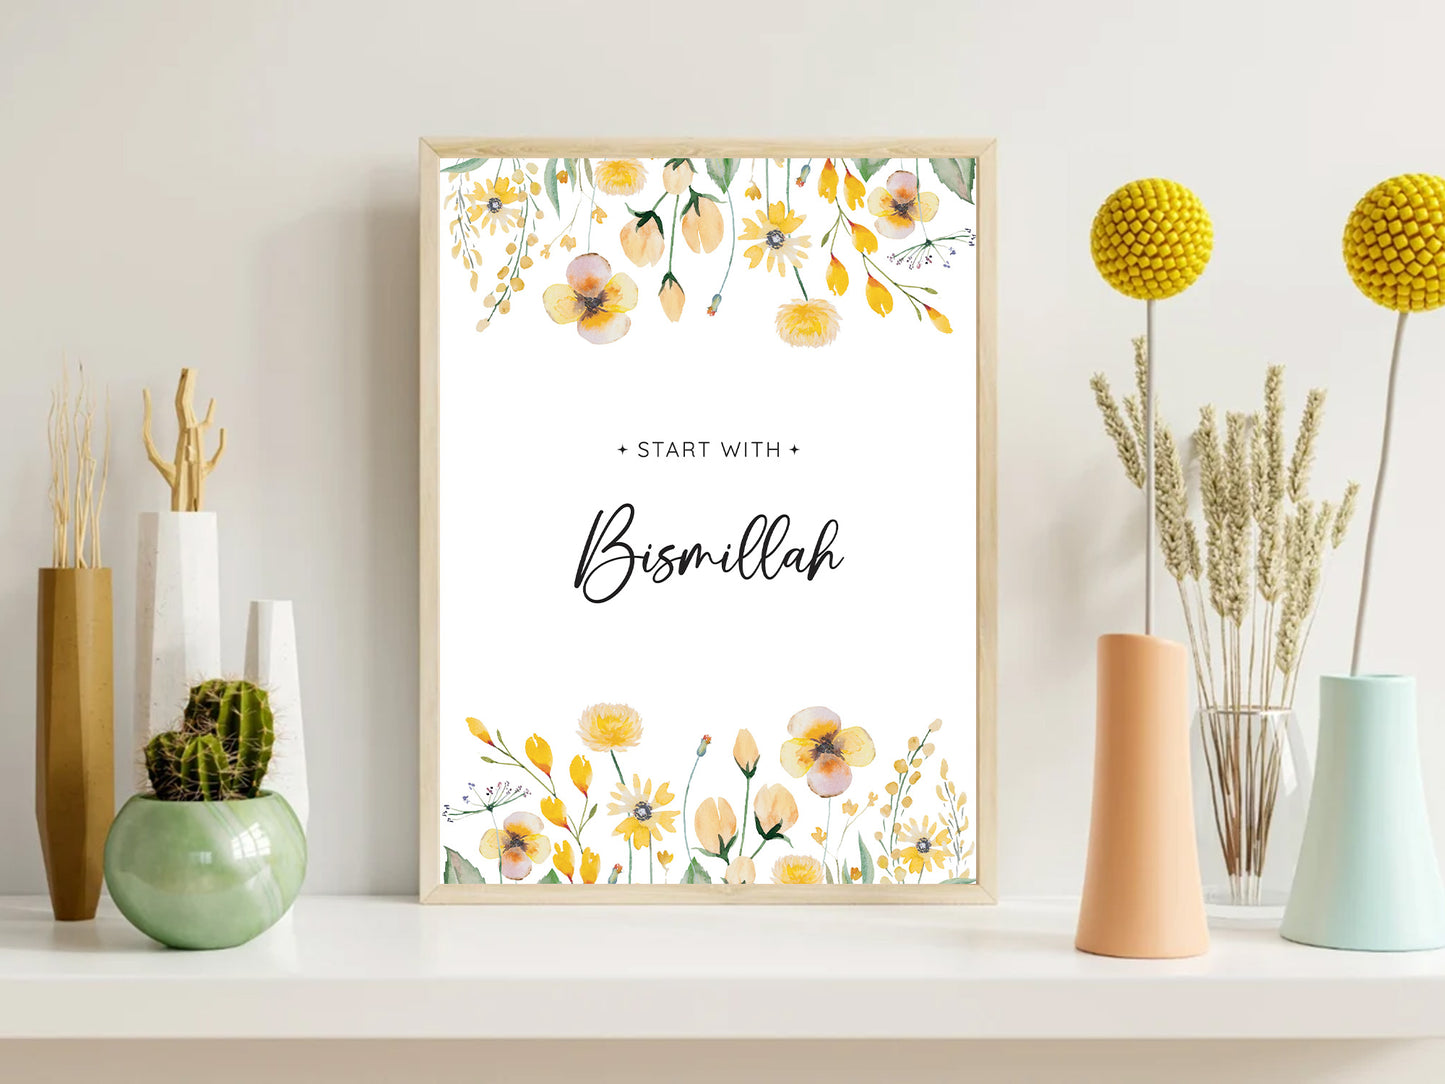 Start with Bismillah, End with Alhamdulillah poster for Nursery room, Islamic home décor, Islamic calligraphy, Islamic gifts, Islamic Print